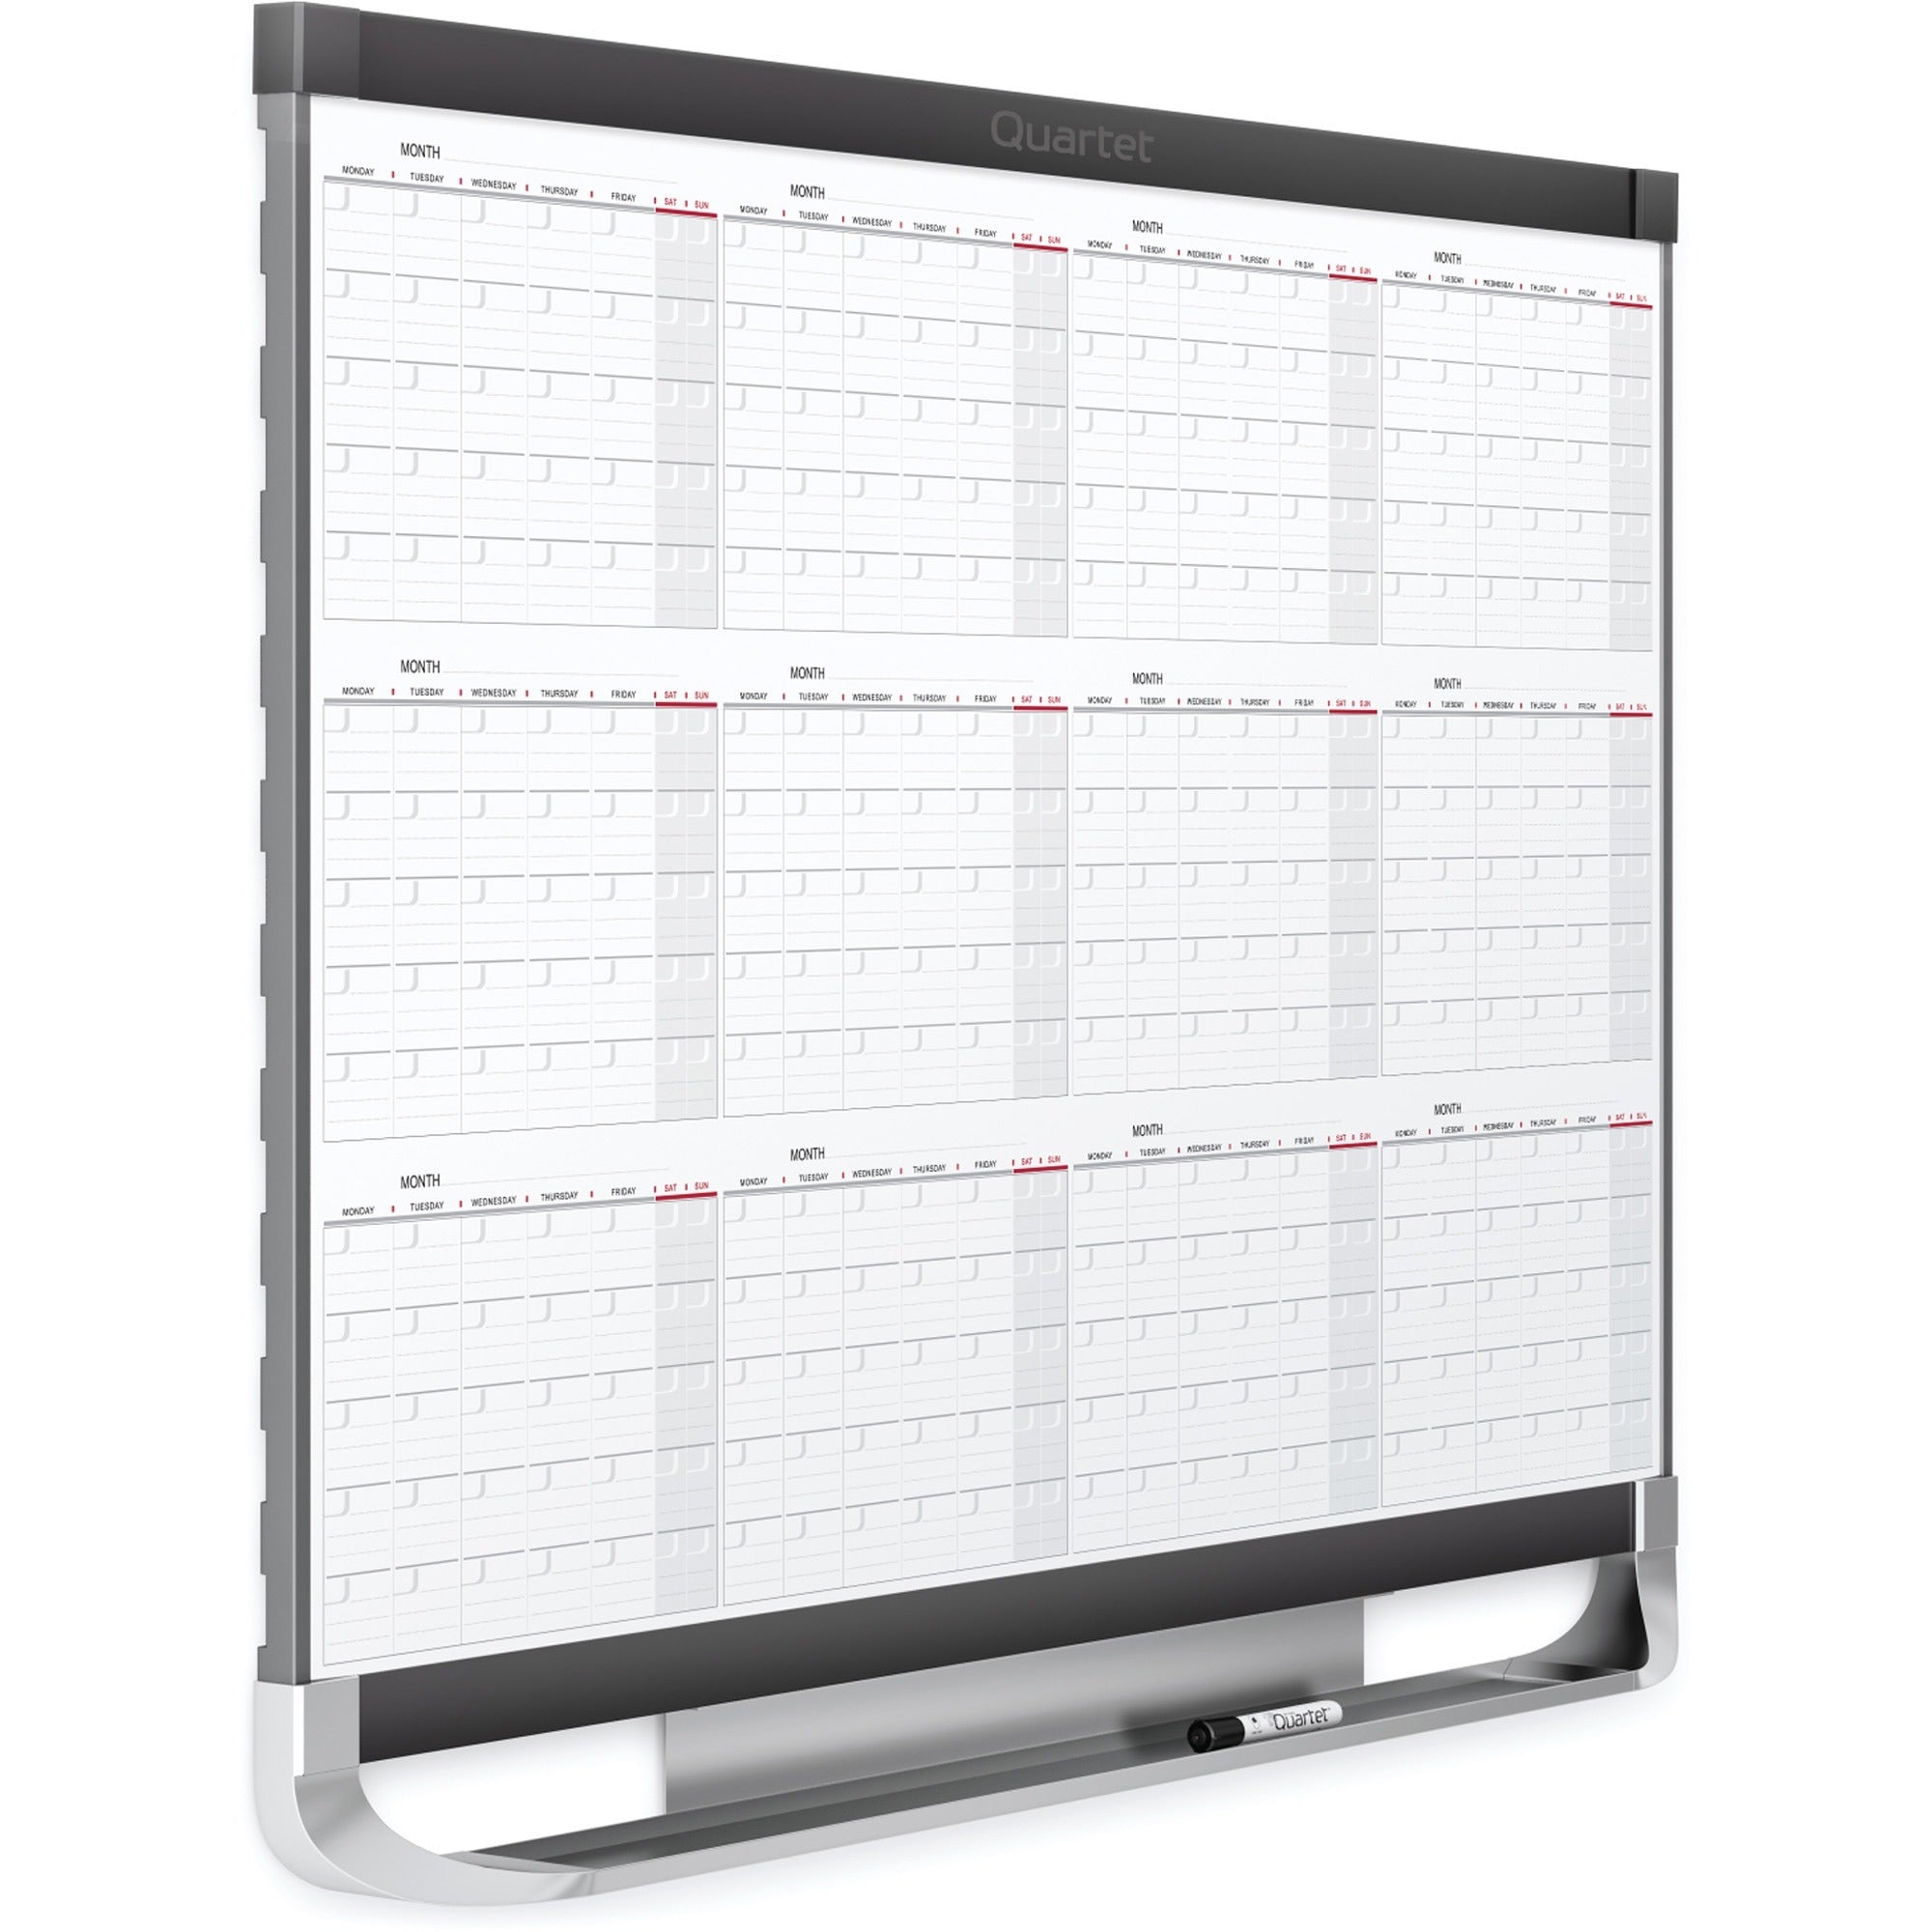 quartet-prestige-2-magnetic-calendar-board-monthly-12-month-white-graphite-steel-24-height-x-36-width-magnetic-ghost-resistant-stain-resistant-durable-marker-tray-mountable-1-each_qrt12mcp23p2 - 3